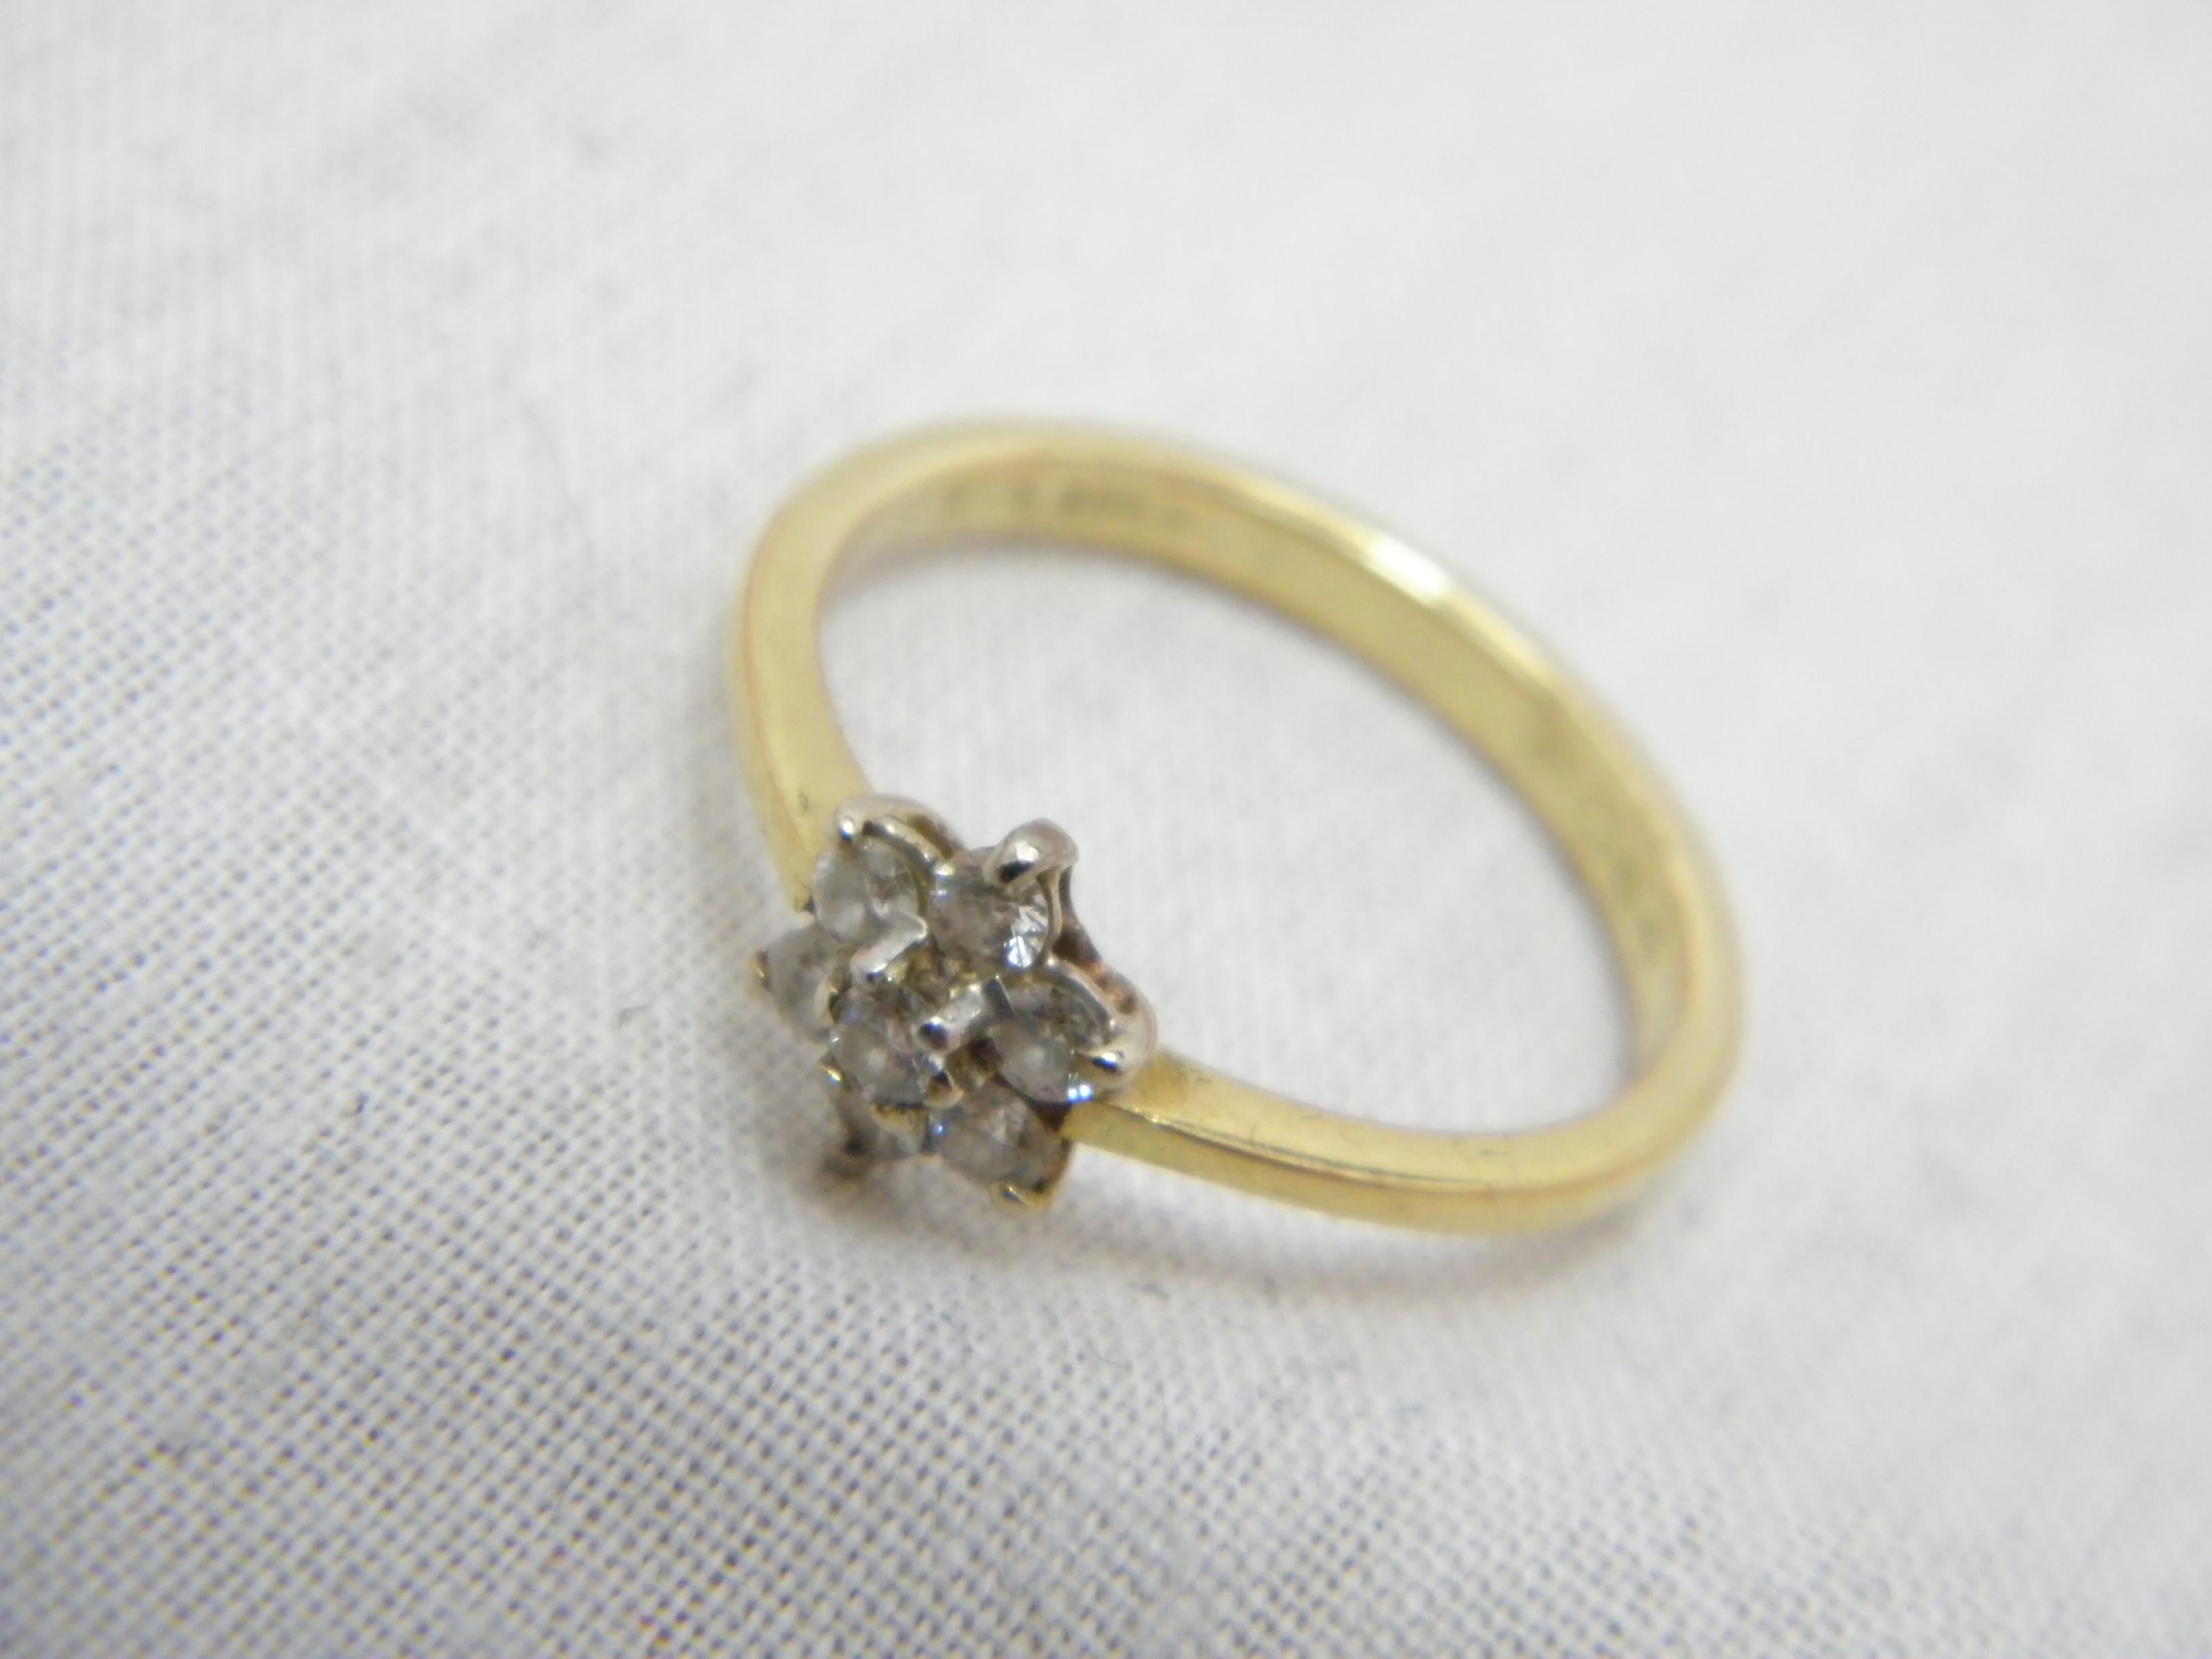 5.25 ring size